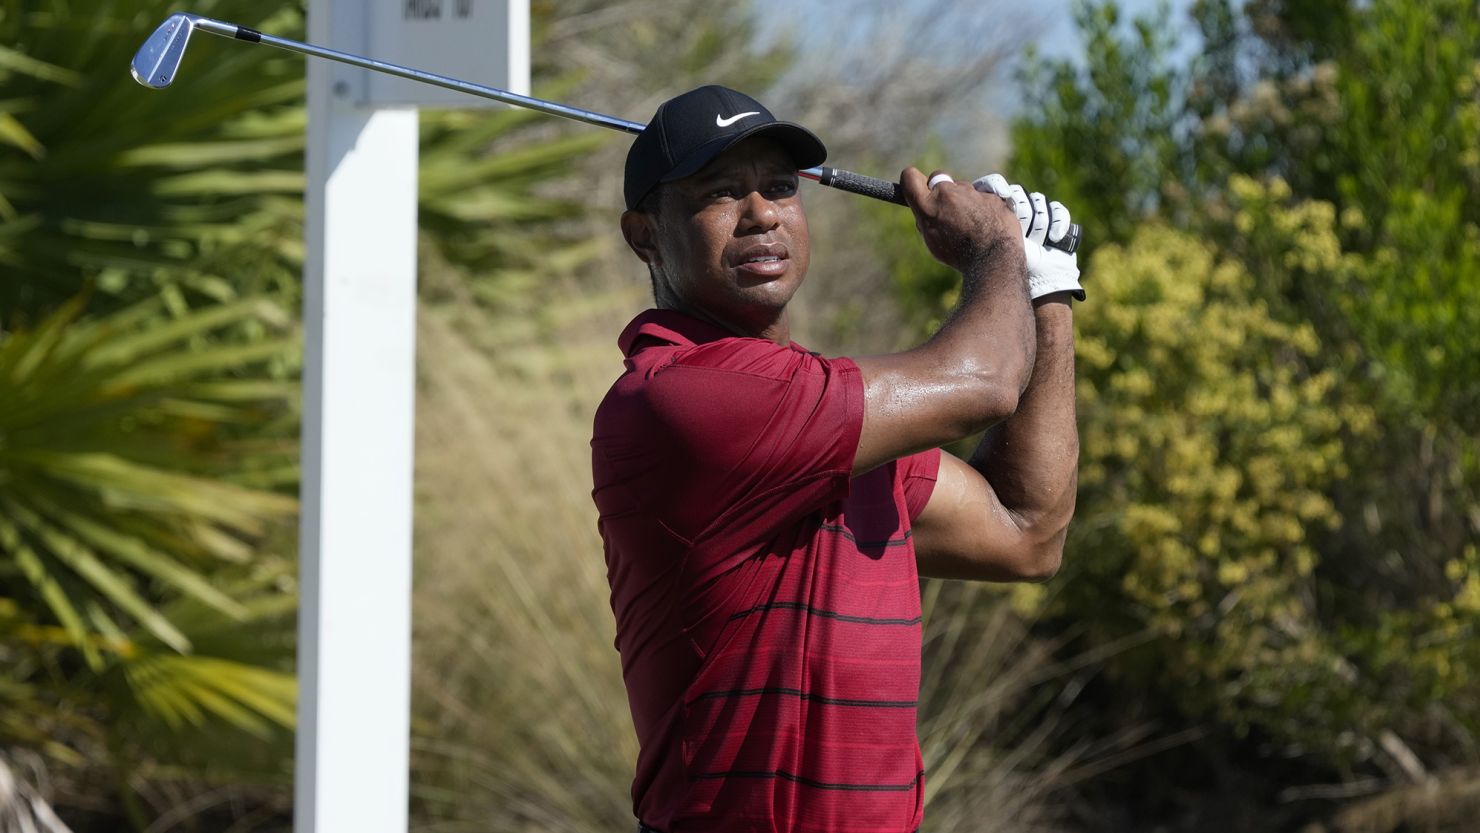 This Tiger Woods comeback was nothing like the others